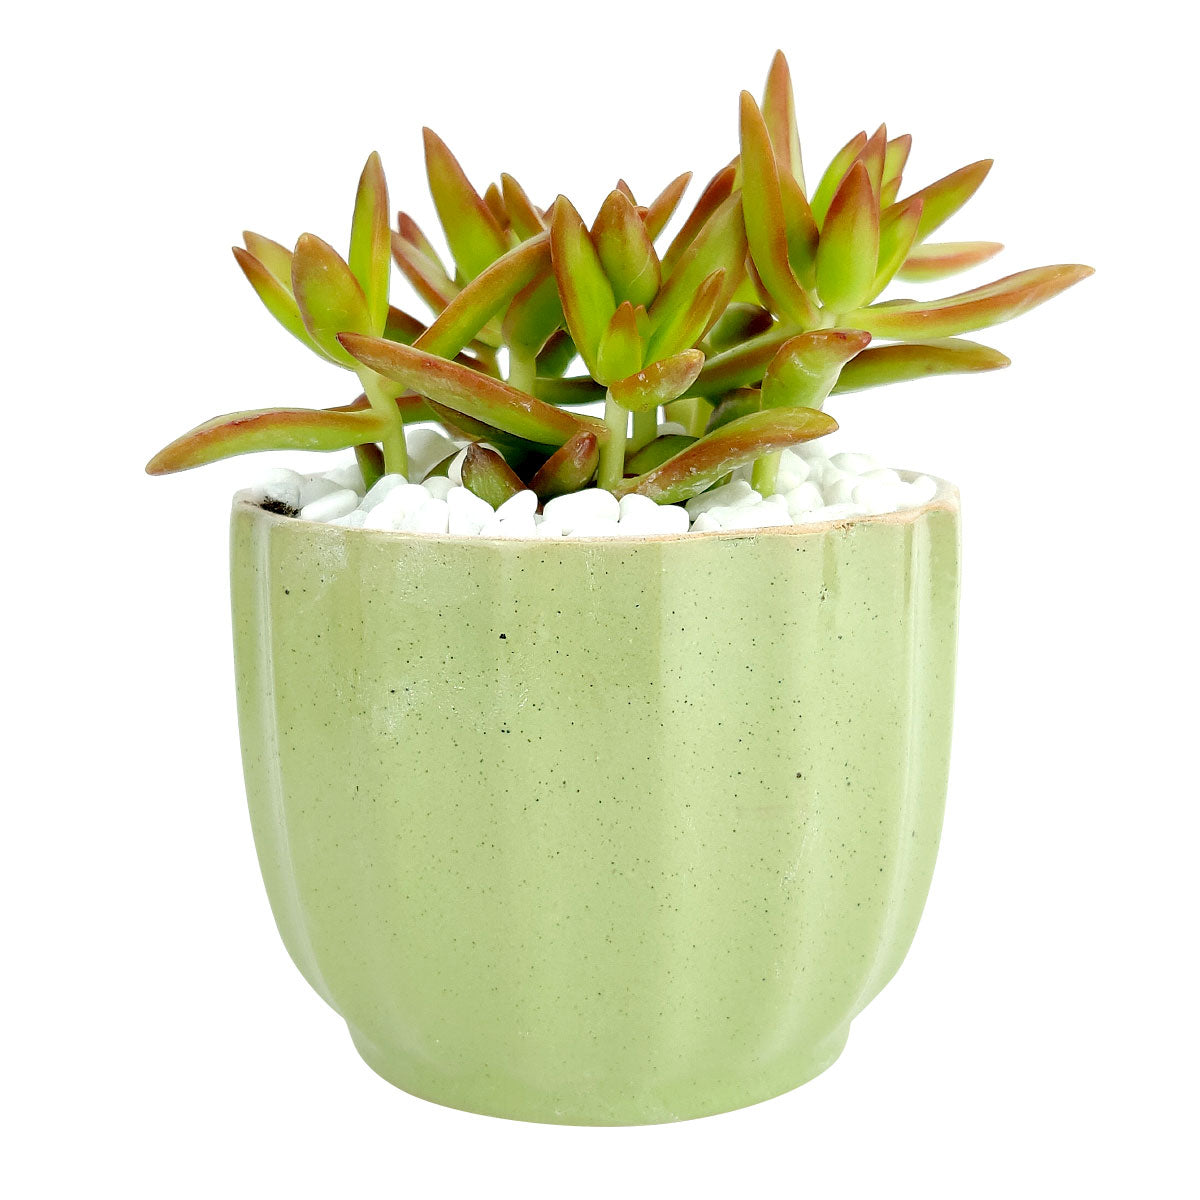 Green Ripple Pot for sale, Round ceramic flower pots, Marble style succulent indoor pots, Small pot for succulent and cactus, green pastel flower ceramic pot, succulent gift decor ideas